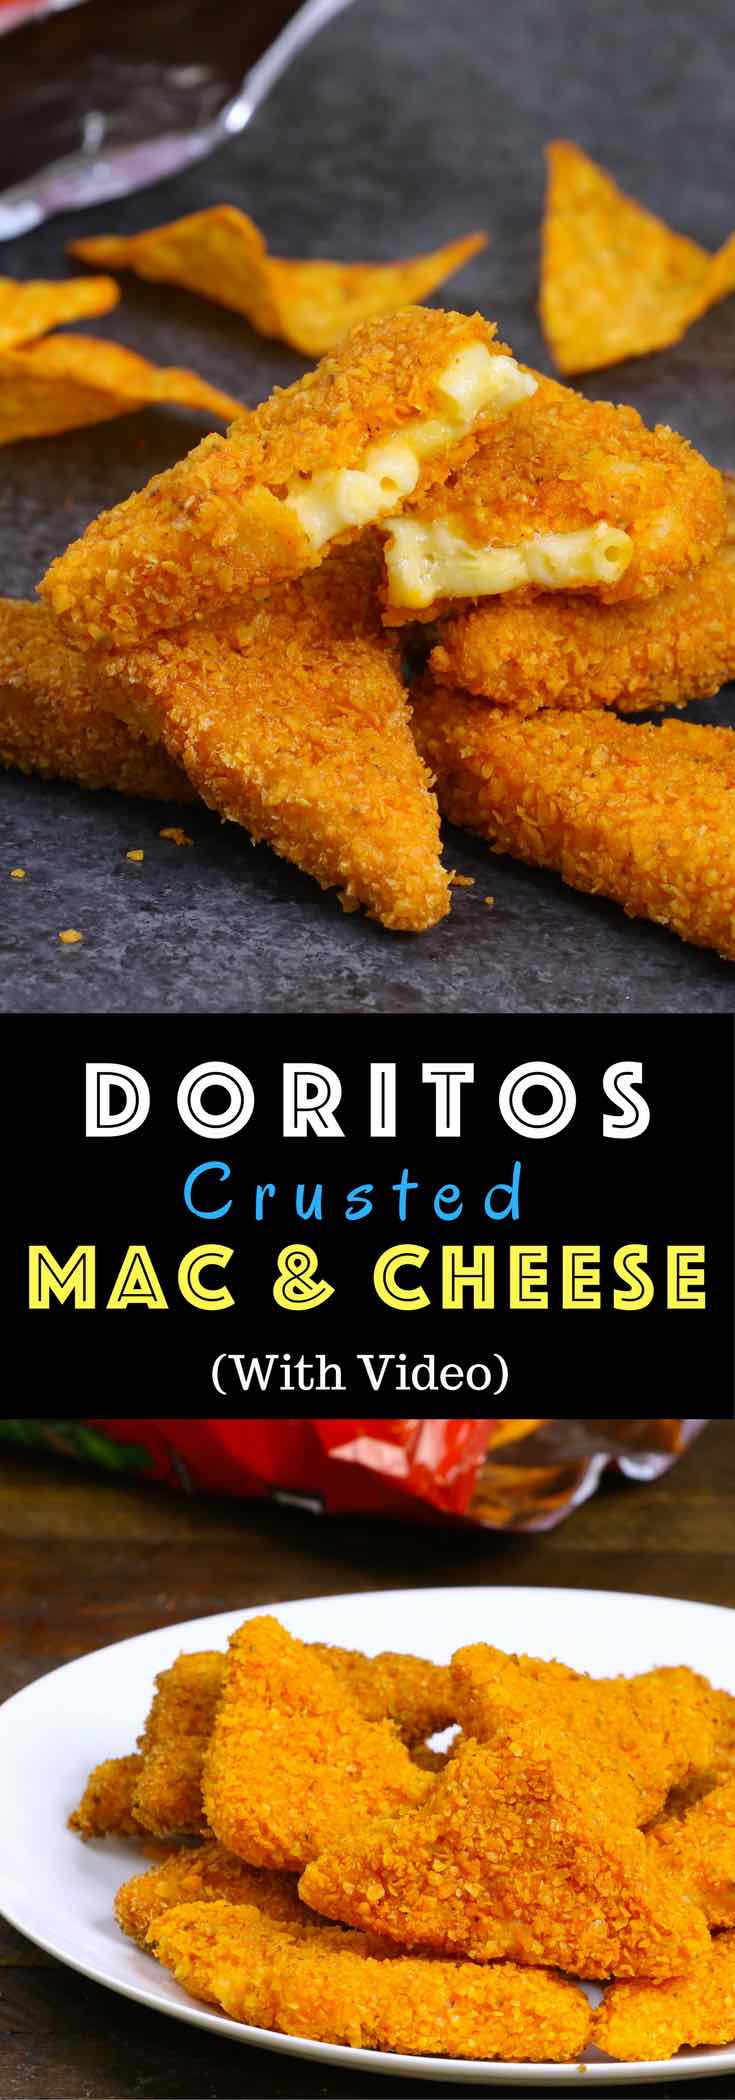 Fried Mac and Cheese Bites with a Doritos crust - crispy on the outside and creamy inside. The perfect party appetizer! #friedmacandcheese #macandcheese